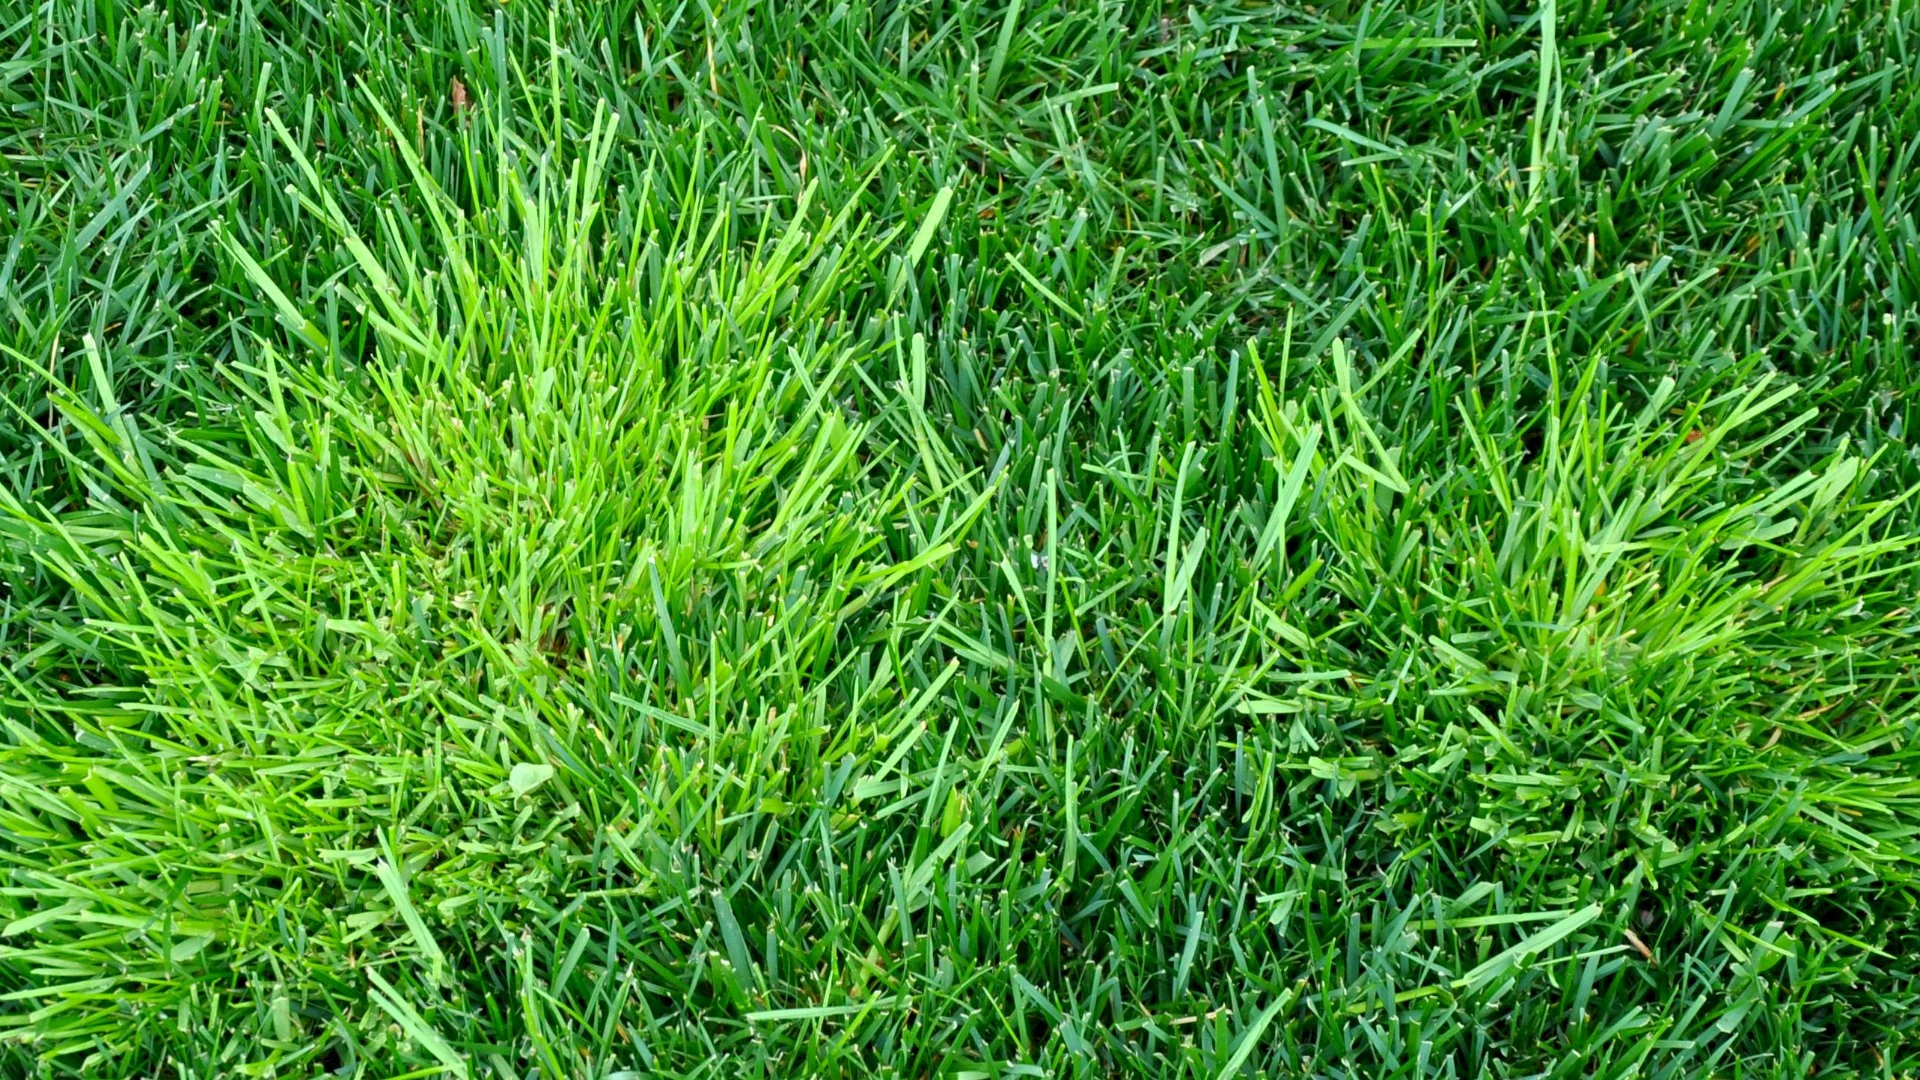 Using Pre- & Post-Emergent Weed Control Is the Recipe for a Weed-Free Lawn